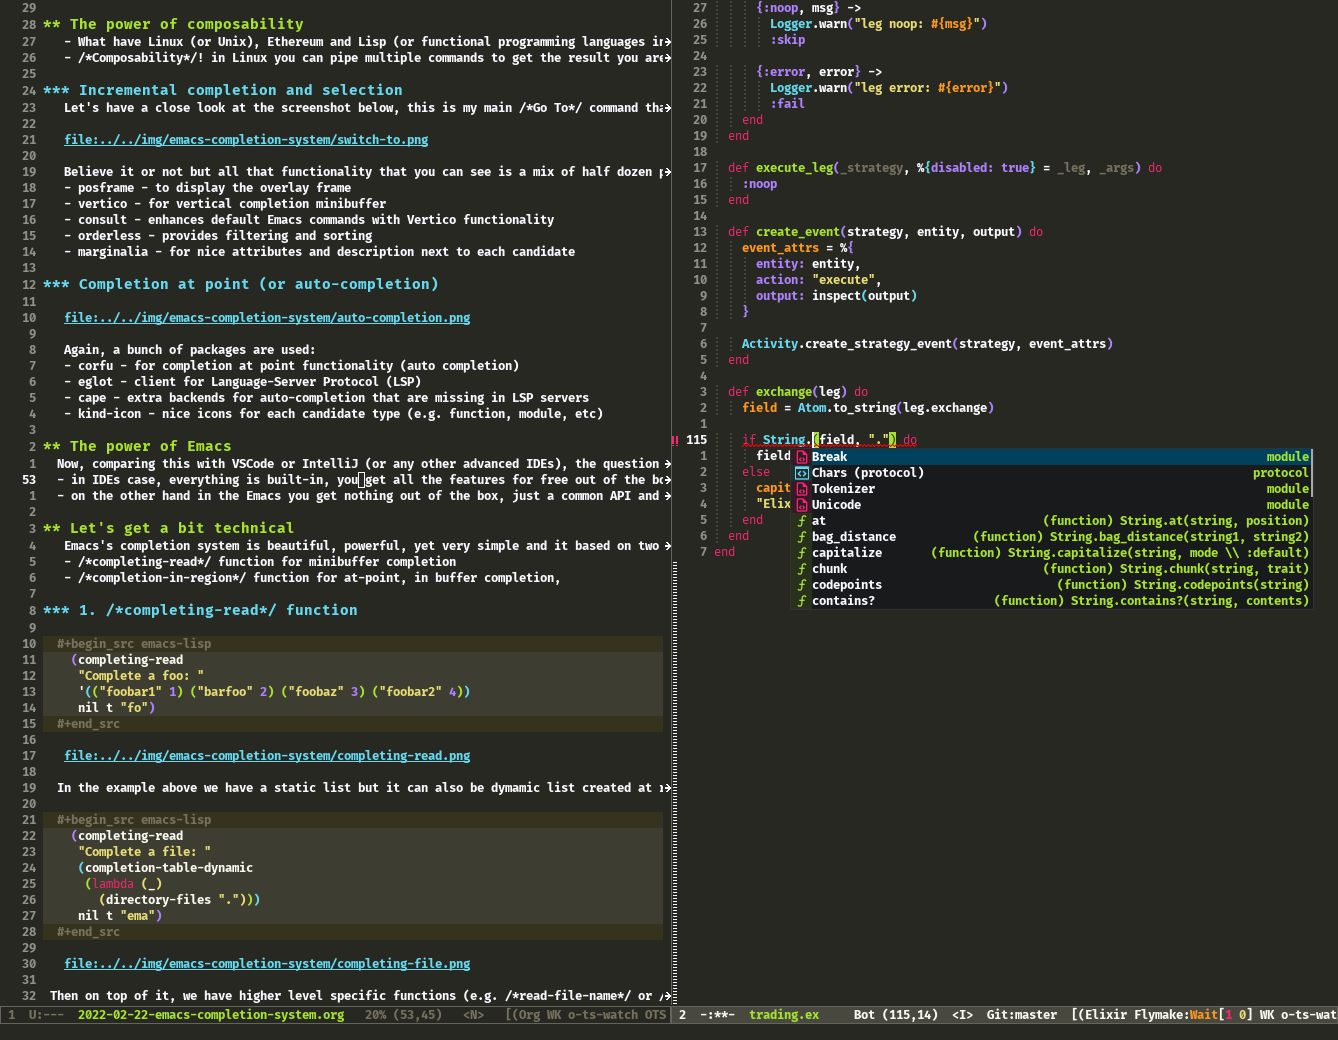 ../../img/emacs-completion-system/auto-completion.png